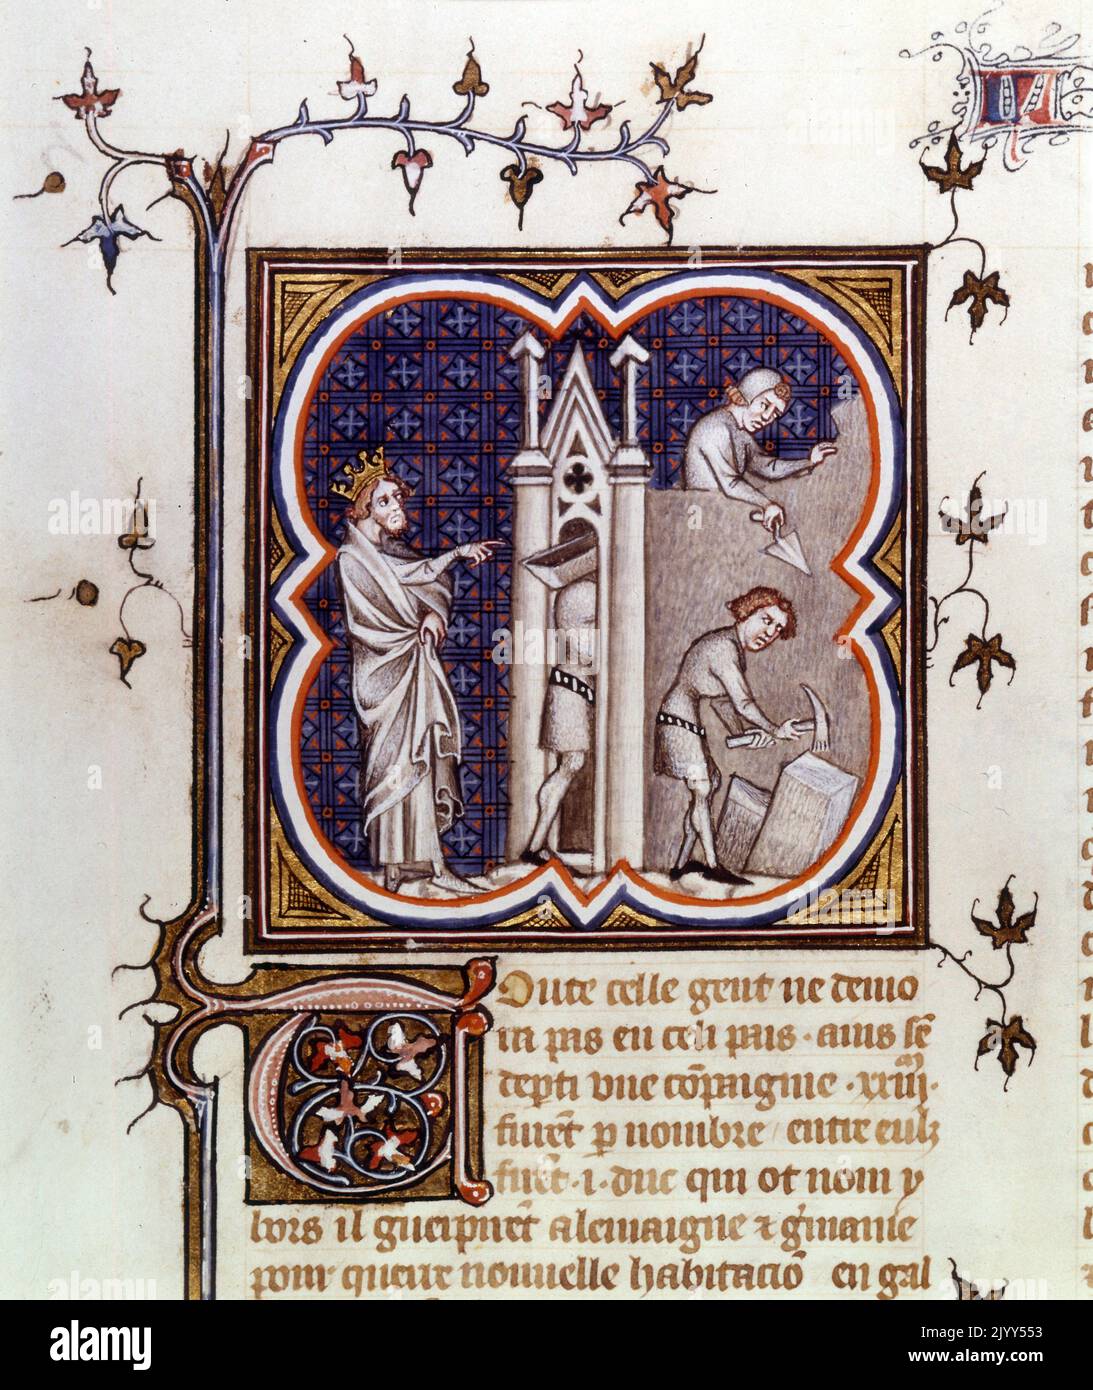 FROM A NOTED MISSAL IN LATIN  A LARGE ILLUMINATED VELLUM MANUSCRIPT LEAF  WITH GLITTERING